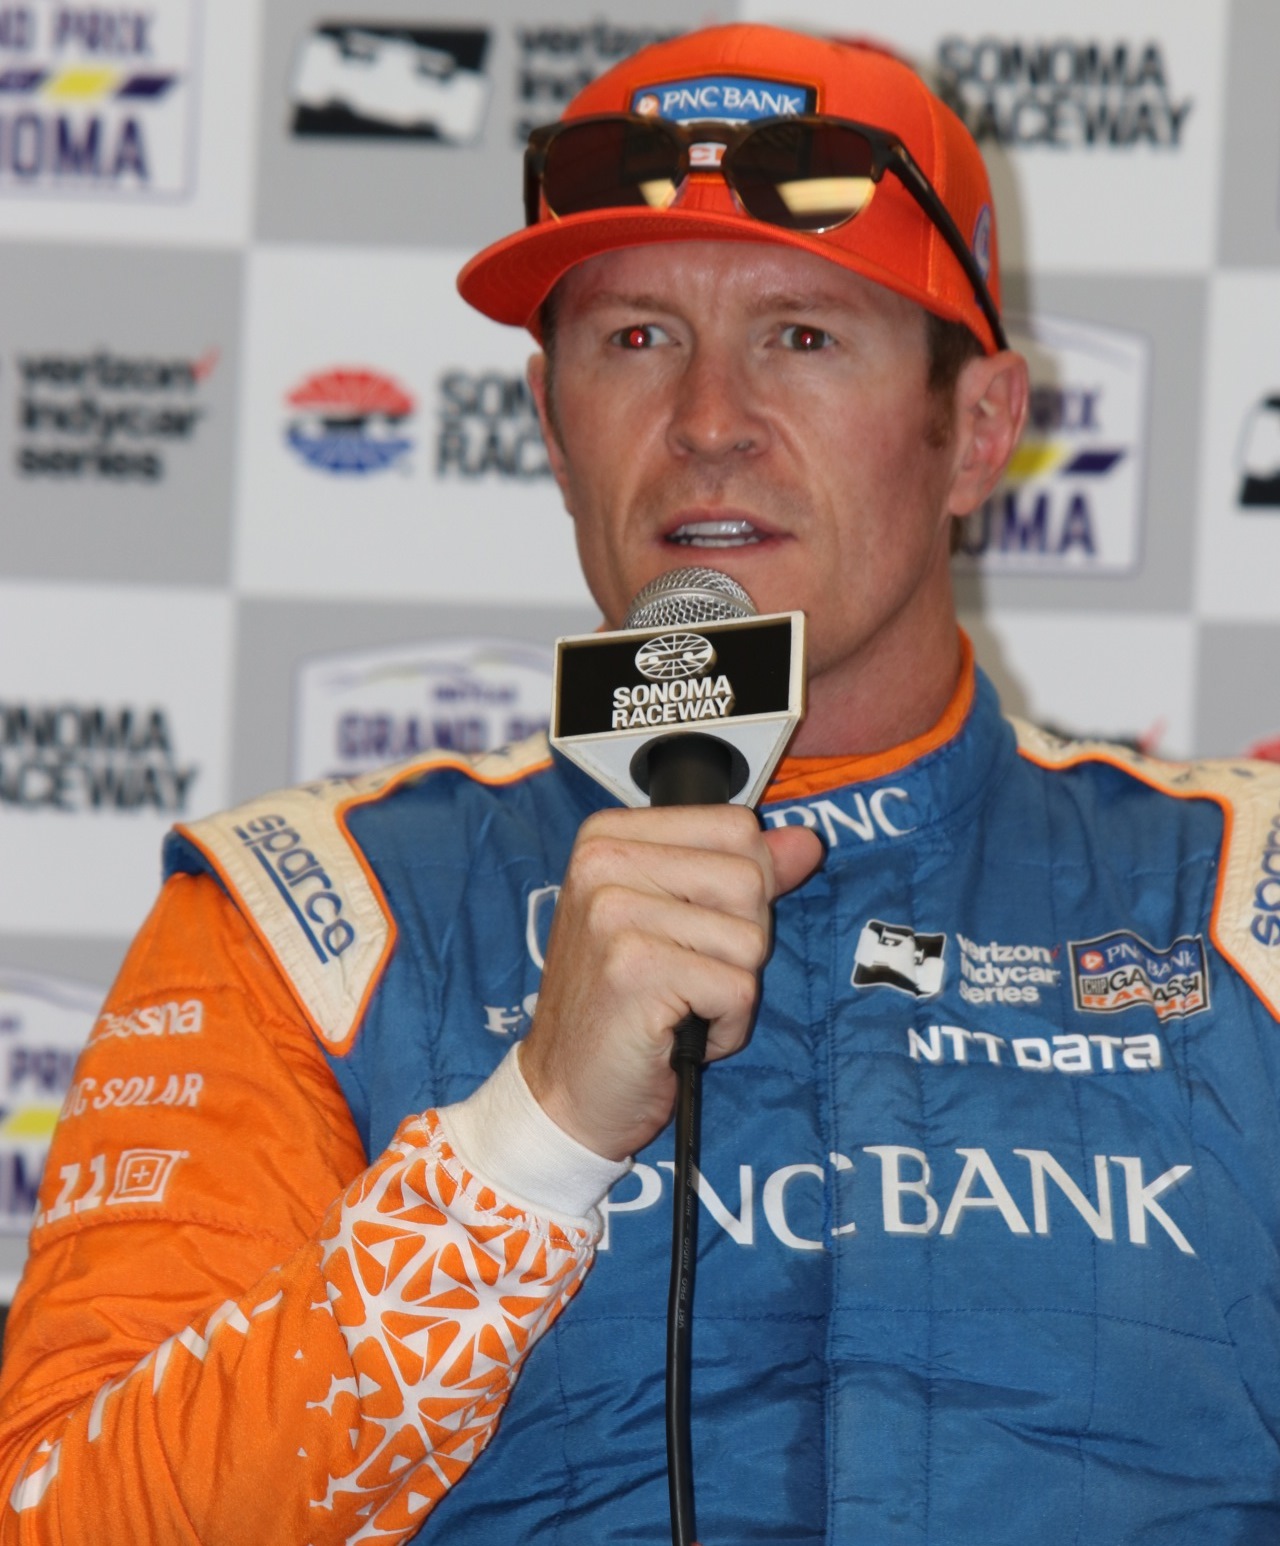 Dixon is the man IndyCar wants to win the title, watch how the cautions fall his way today